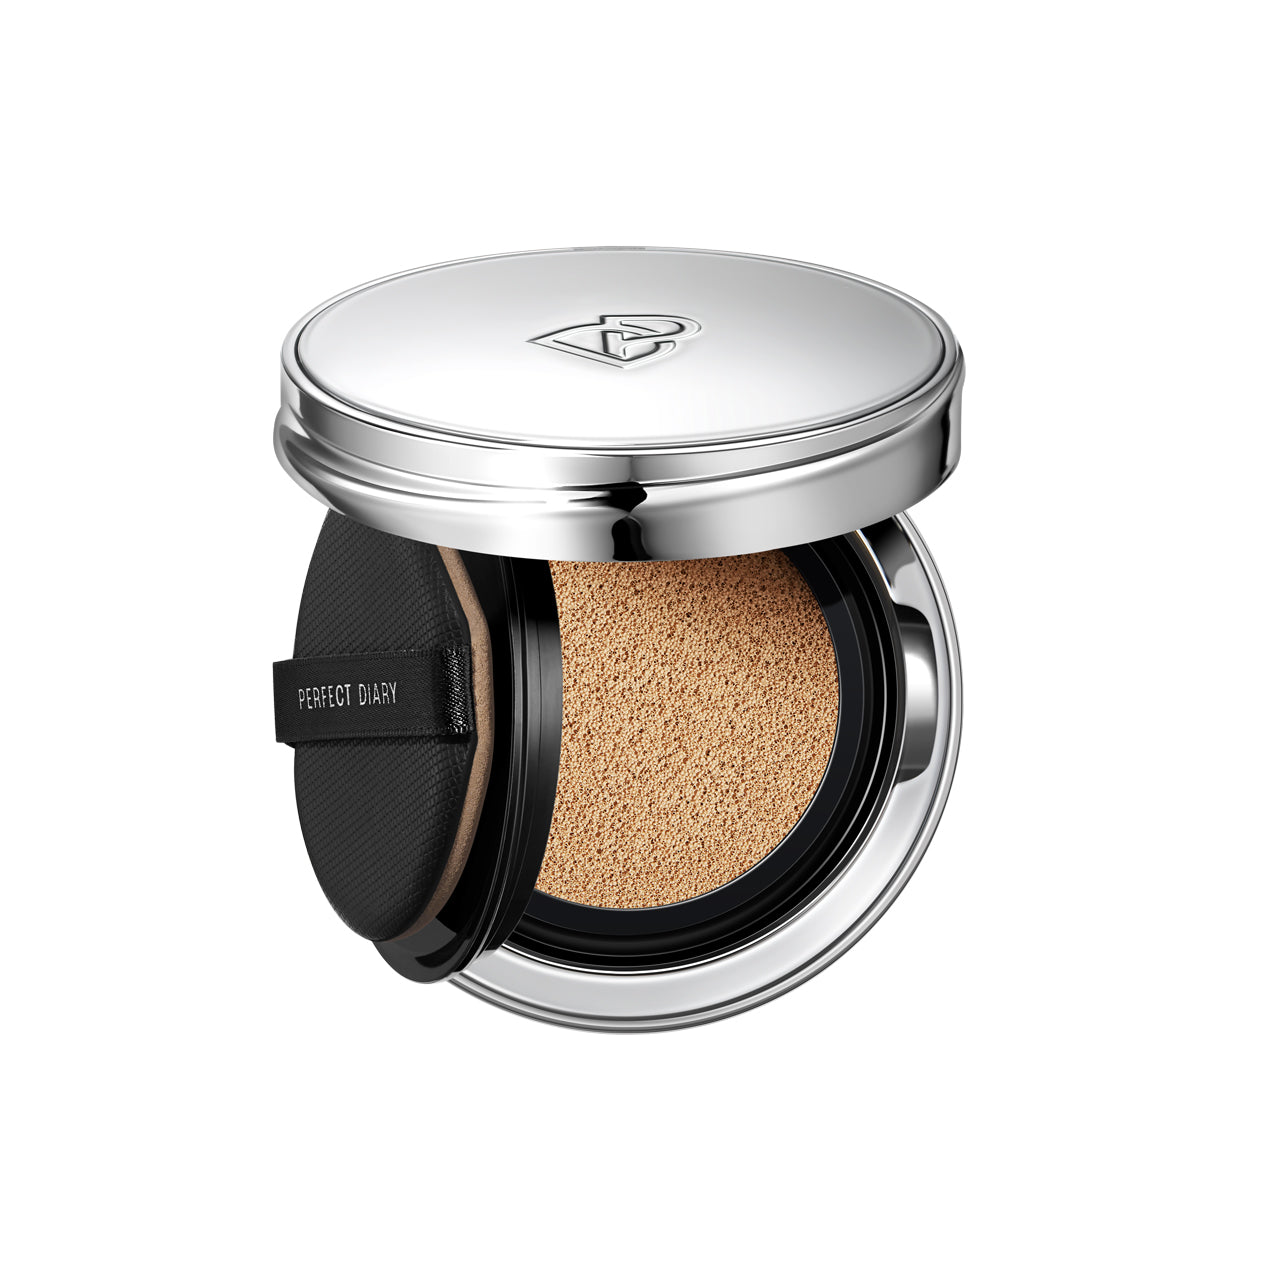 Perfect Diary Renewal Cushion Foundation Makeup Concealer Waterproof (Shipping not included)